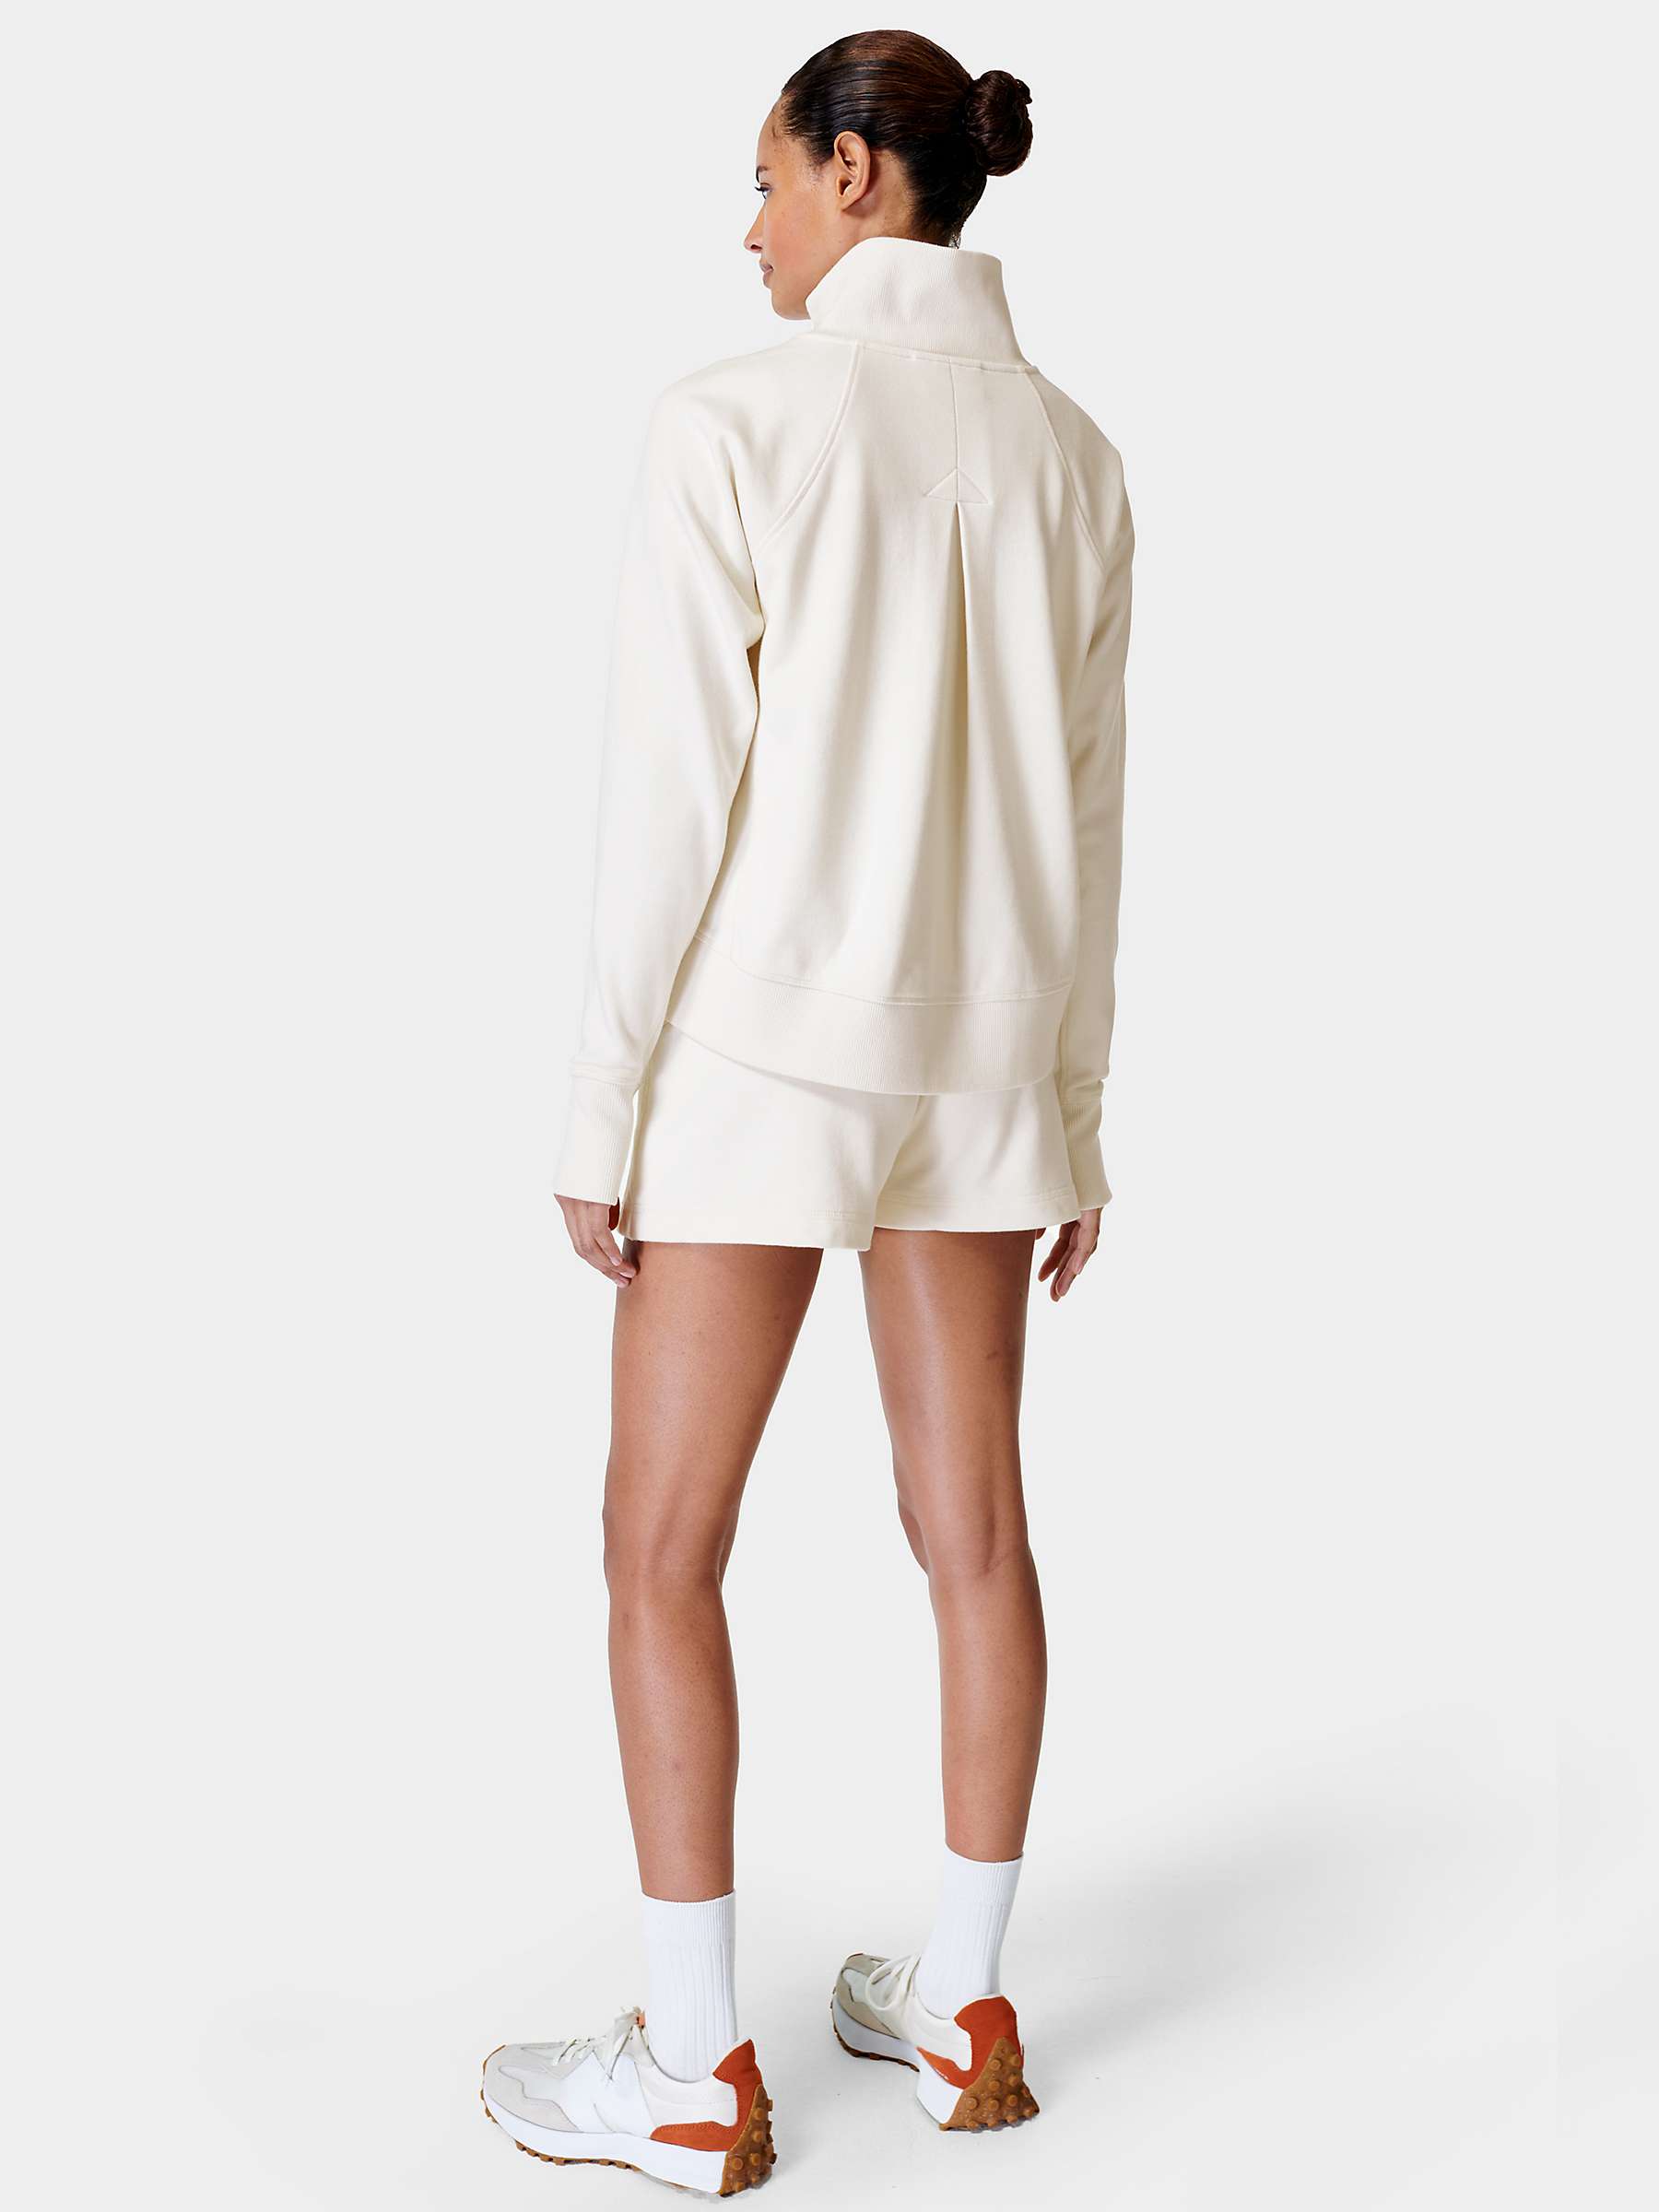 Sweaty Betty Revive High Waist Shorts, Lily White at John Lewis & Partners